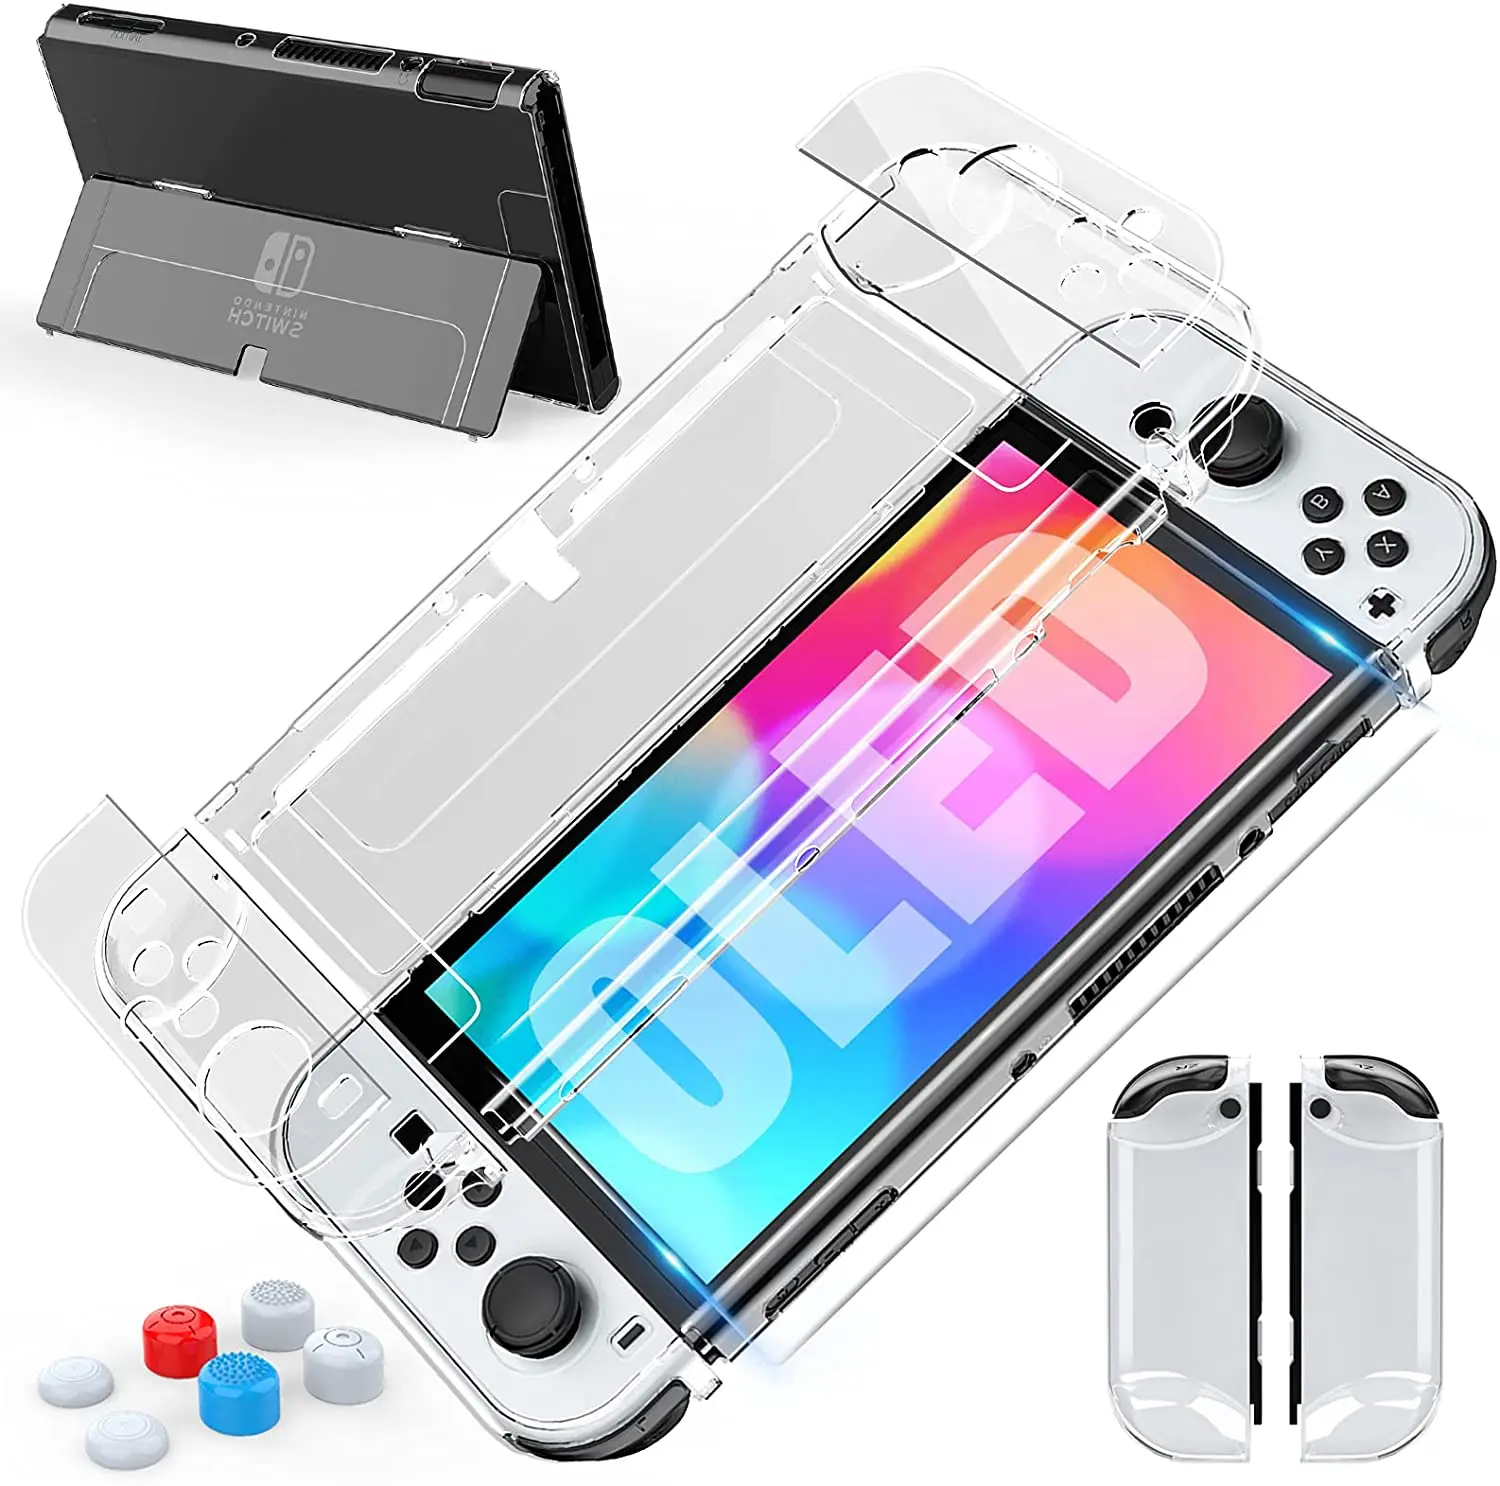 

Mooroer Case Dockable Compatible with Nintendo Switch OLED Model 2021, Clear PC Protective Case Cover for Joy-Con